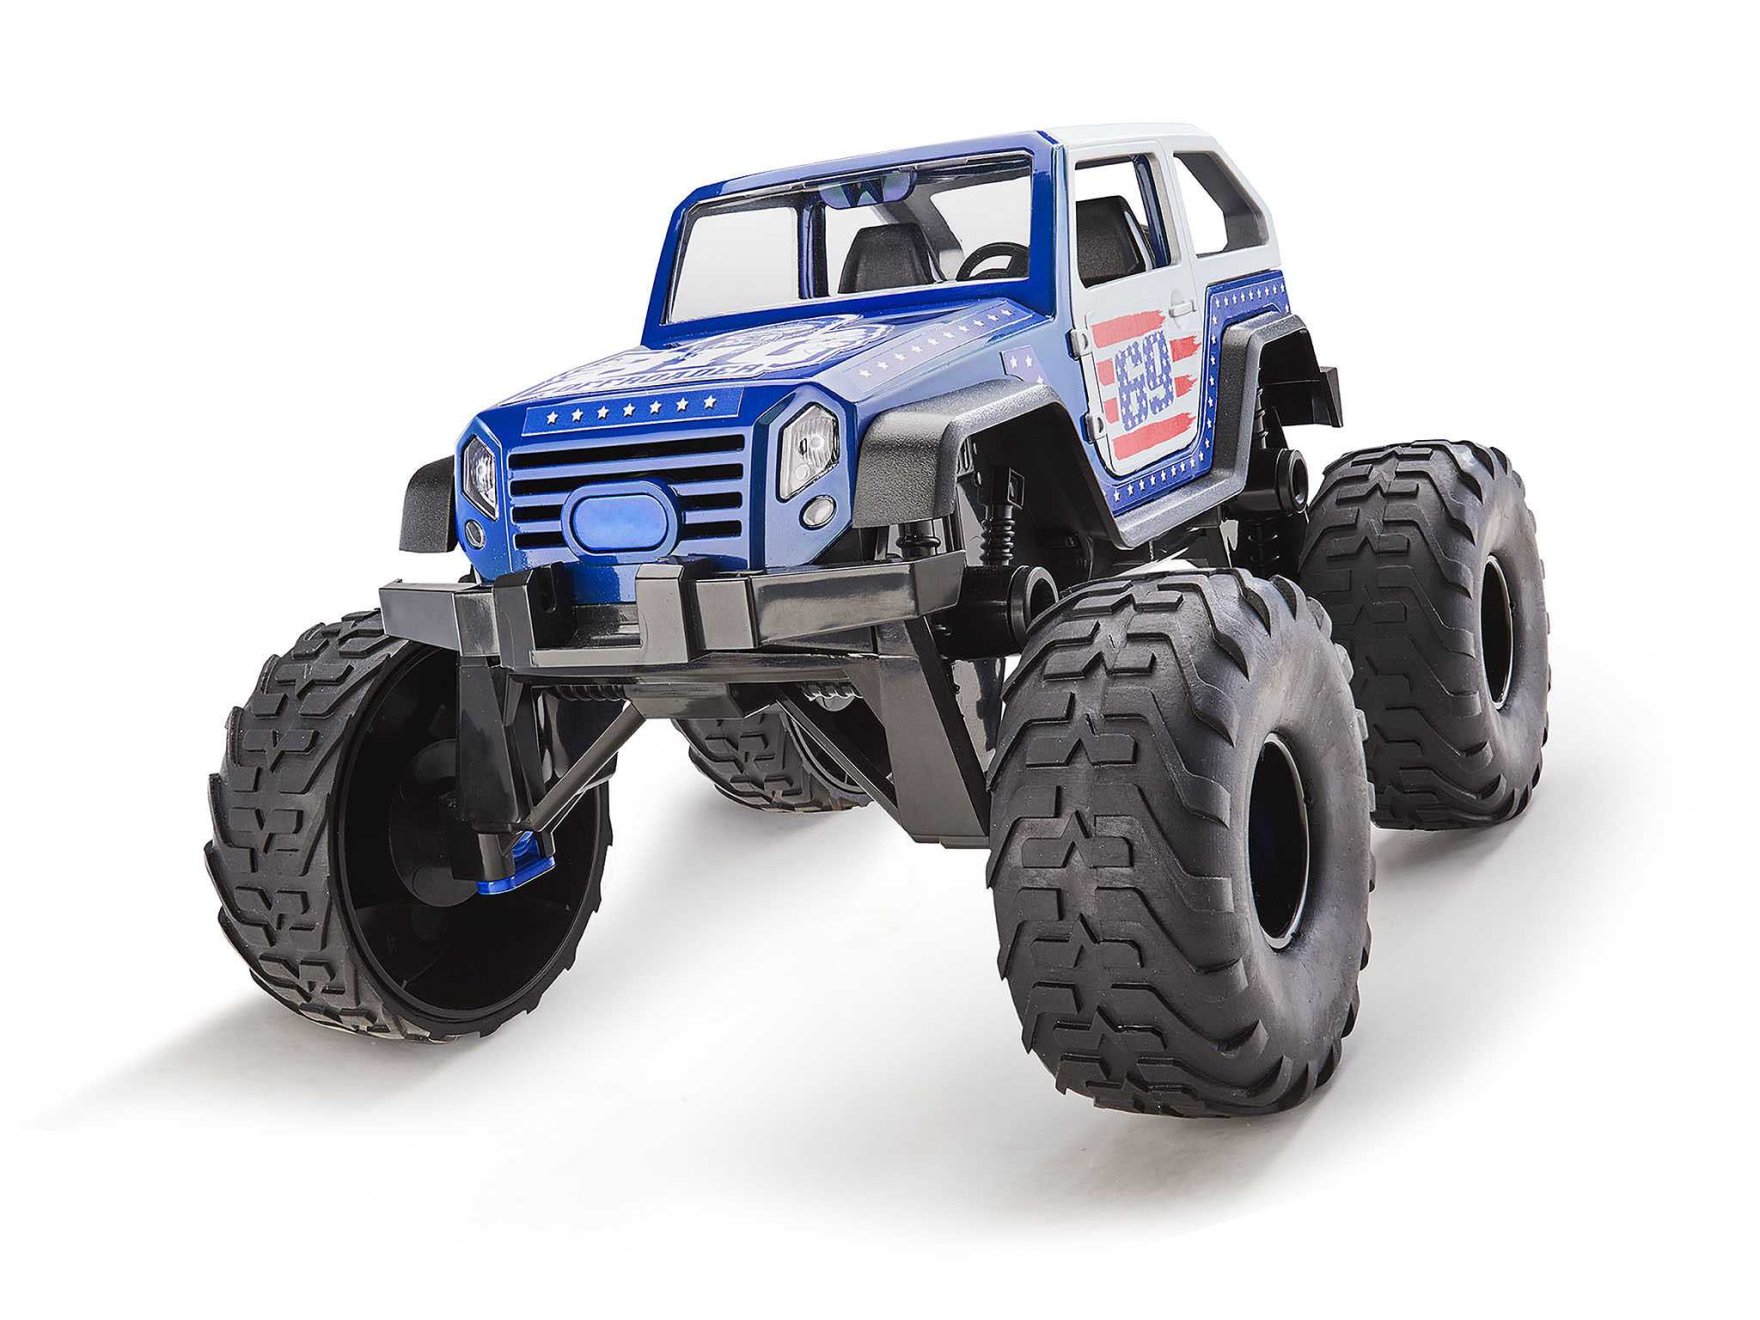 REVELL First Construction auto 00919 Monster Truck 1:20